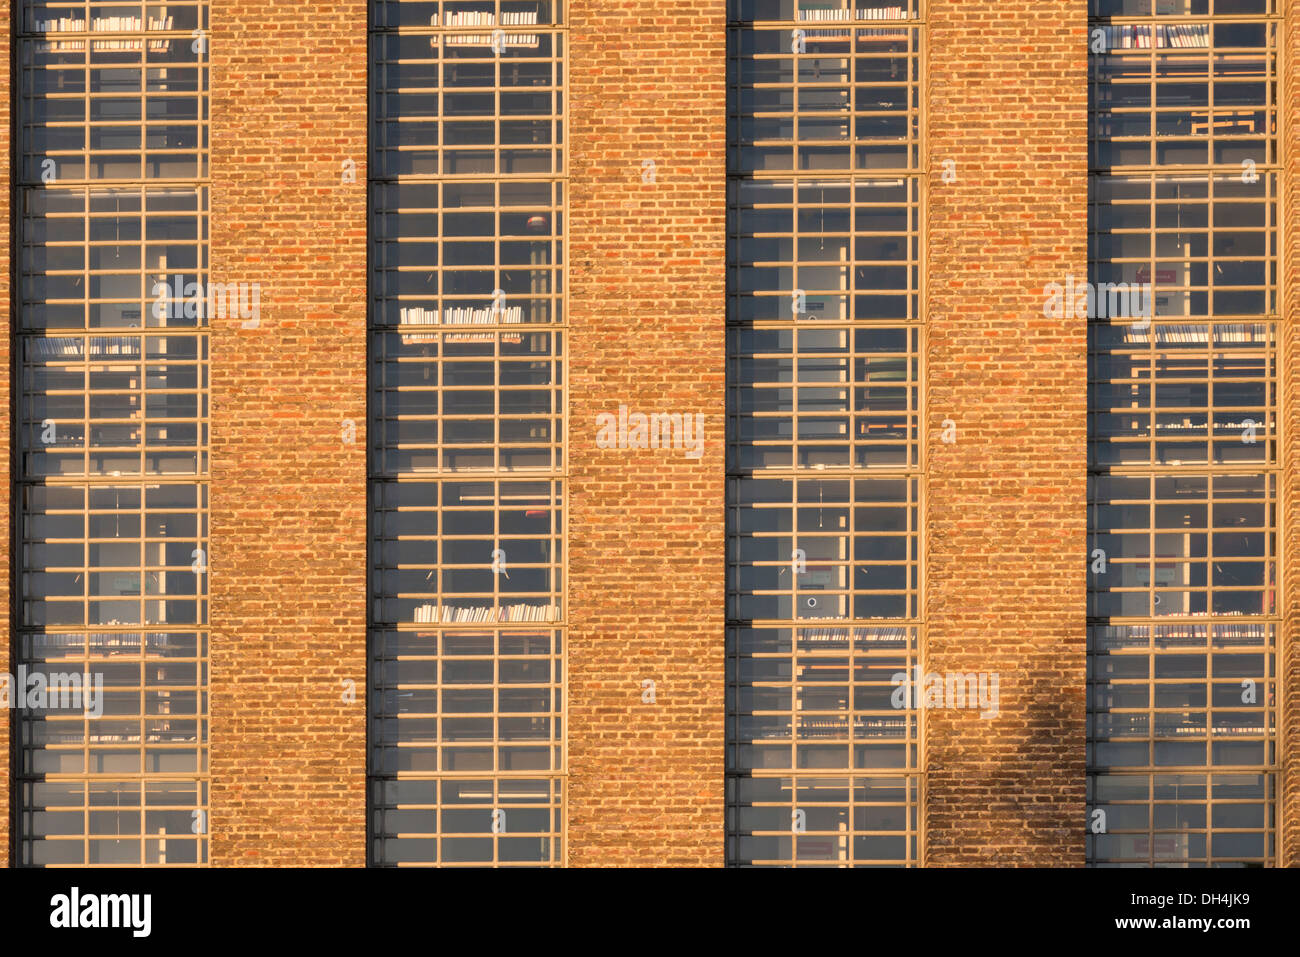 The Cambridge University Library  building showing the windows and glass pattern in early morning light. Stock Photo